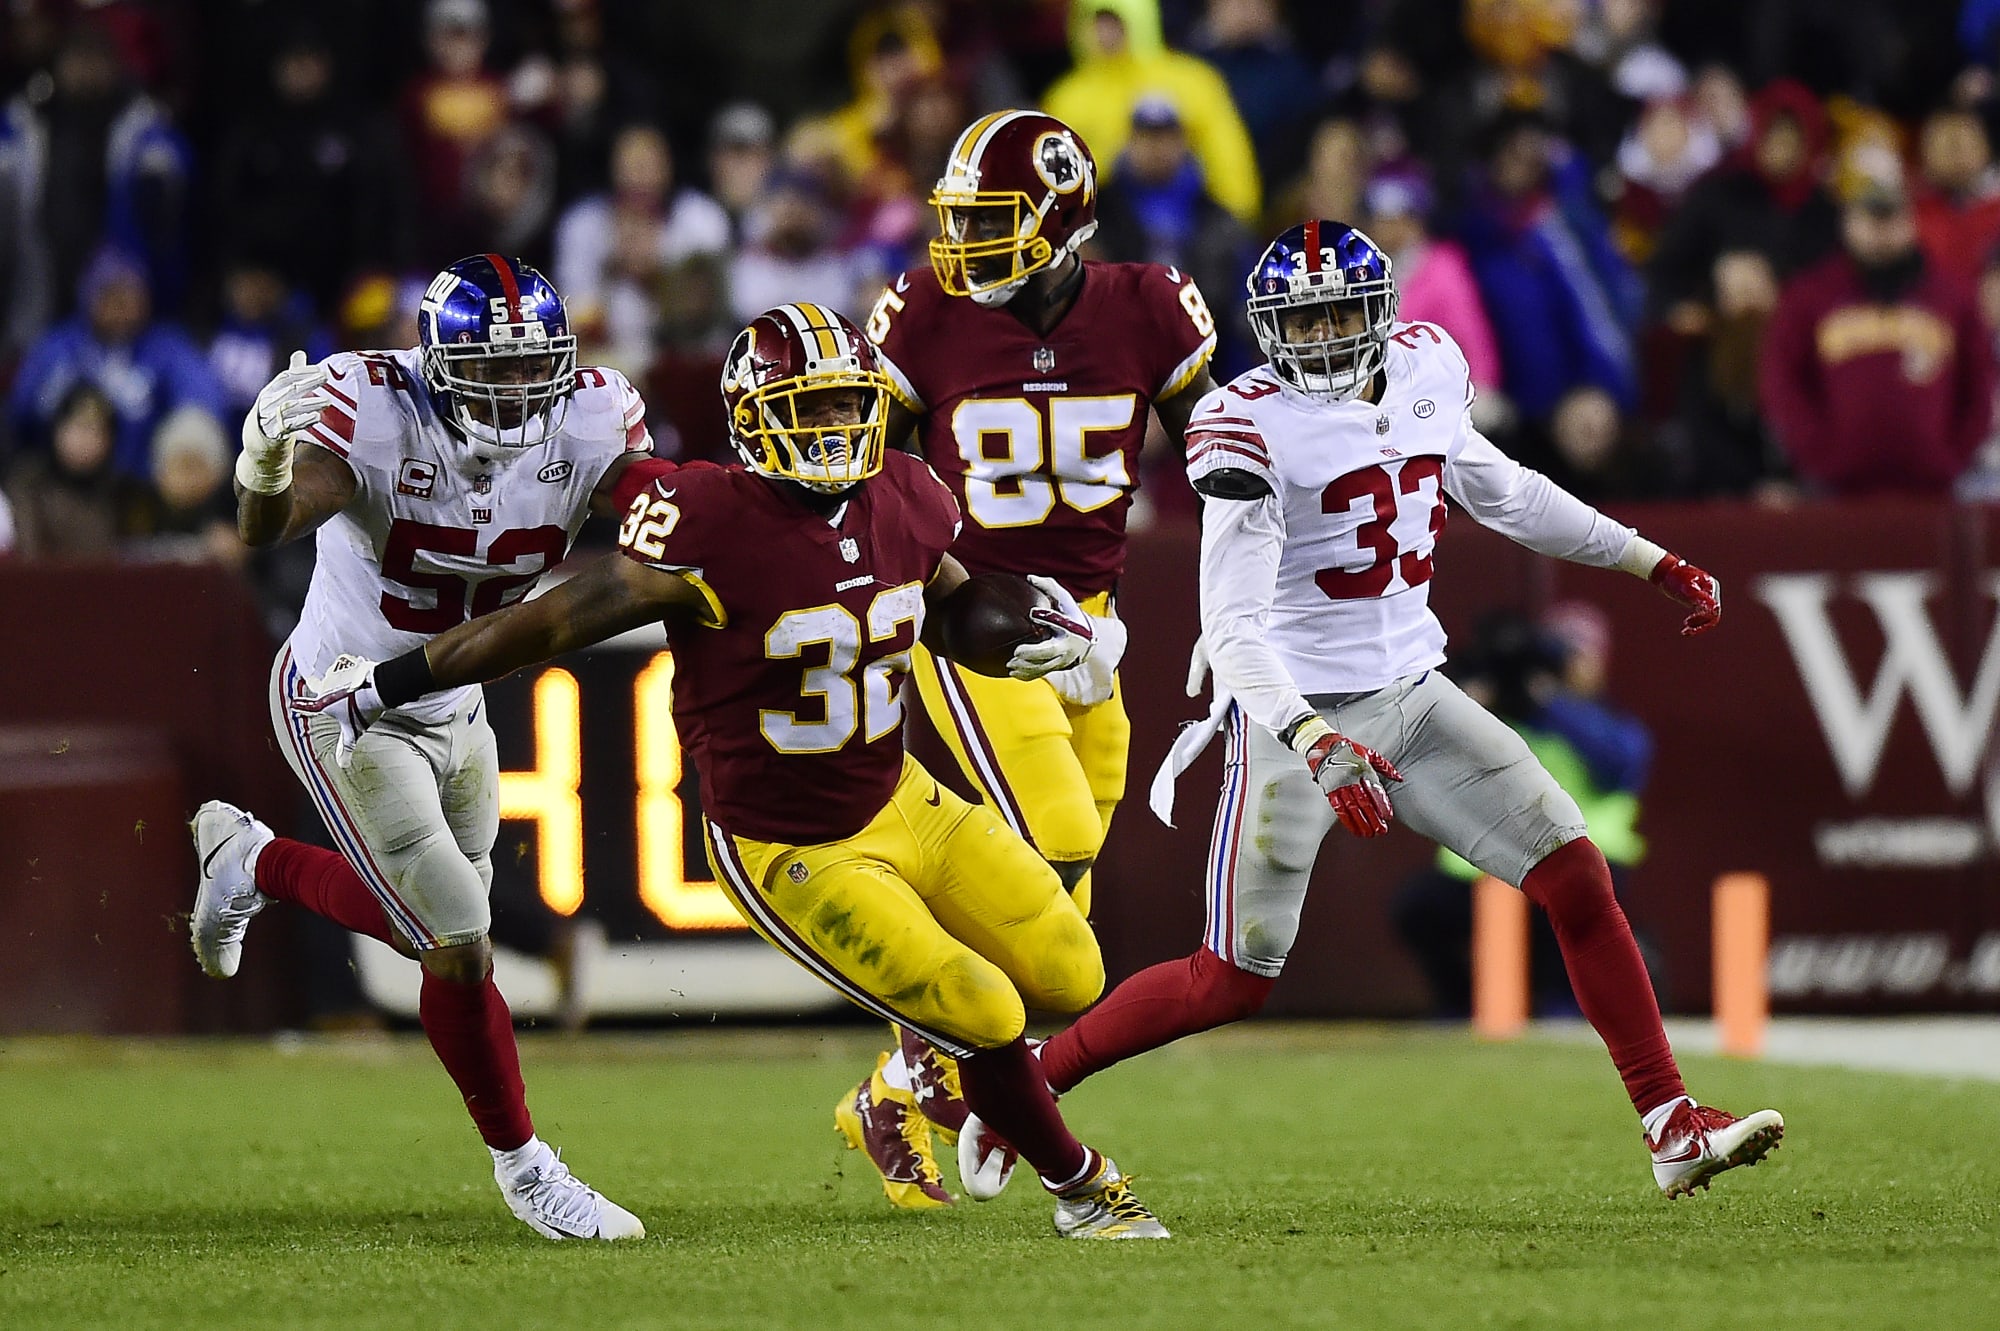 Redskins vs. Giants Game preview, how to watch, and more